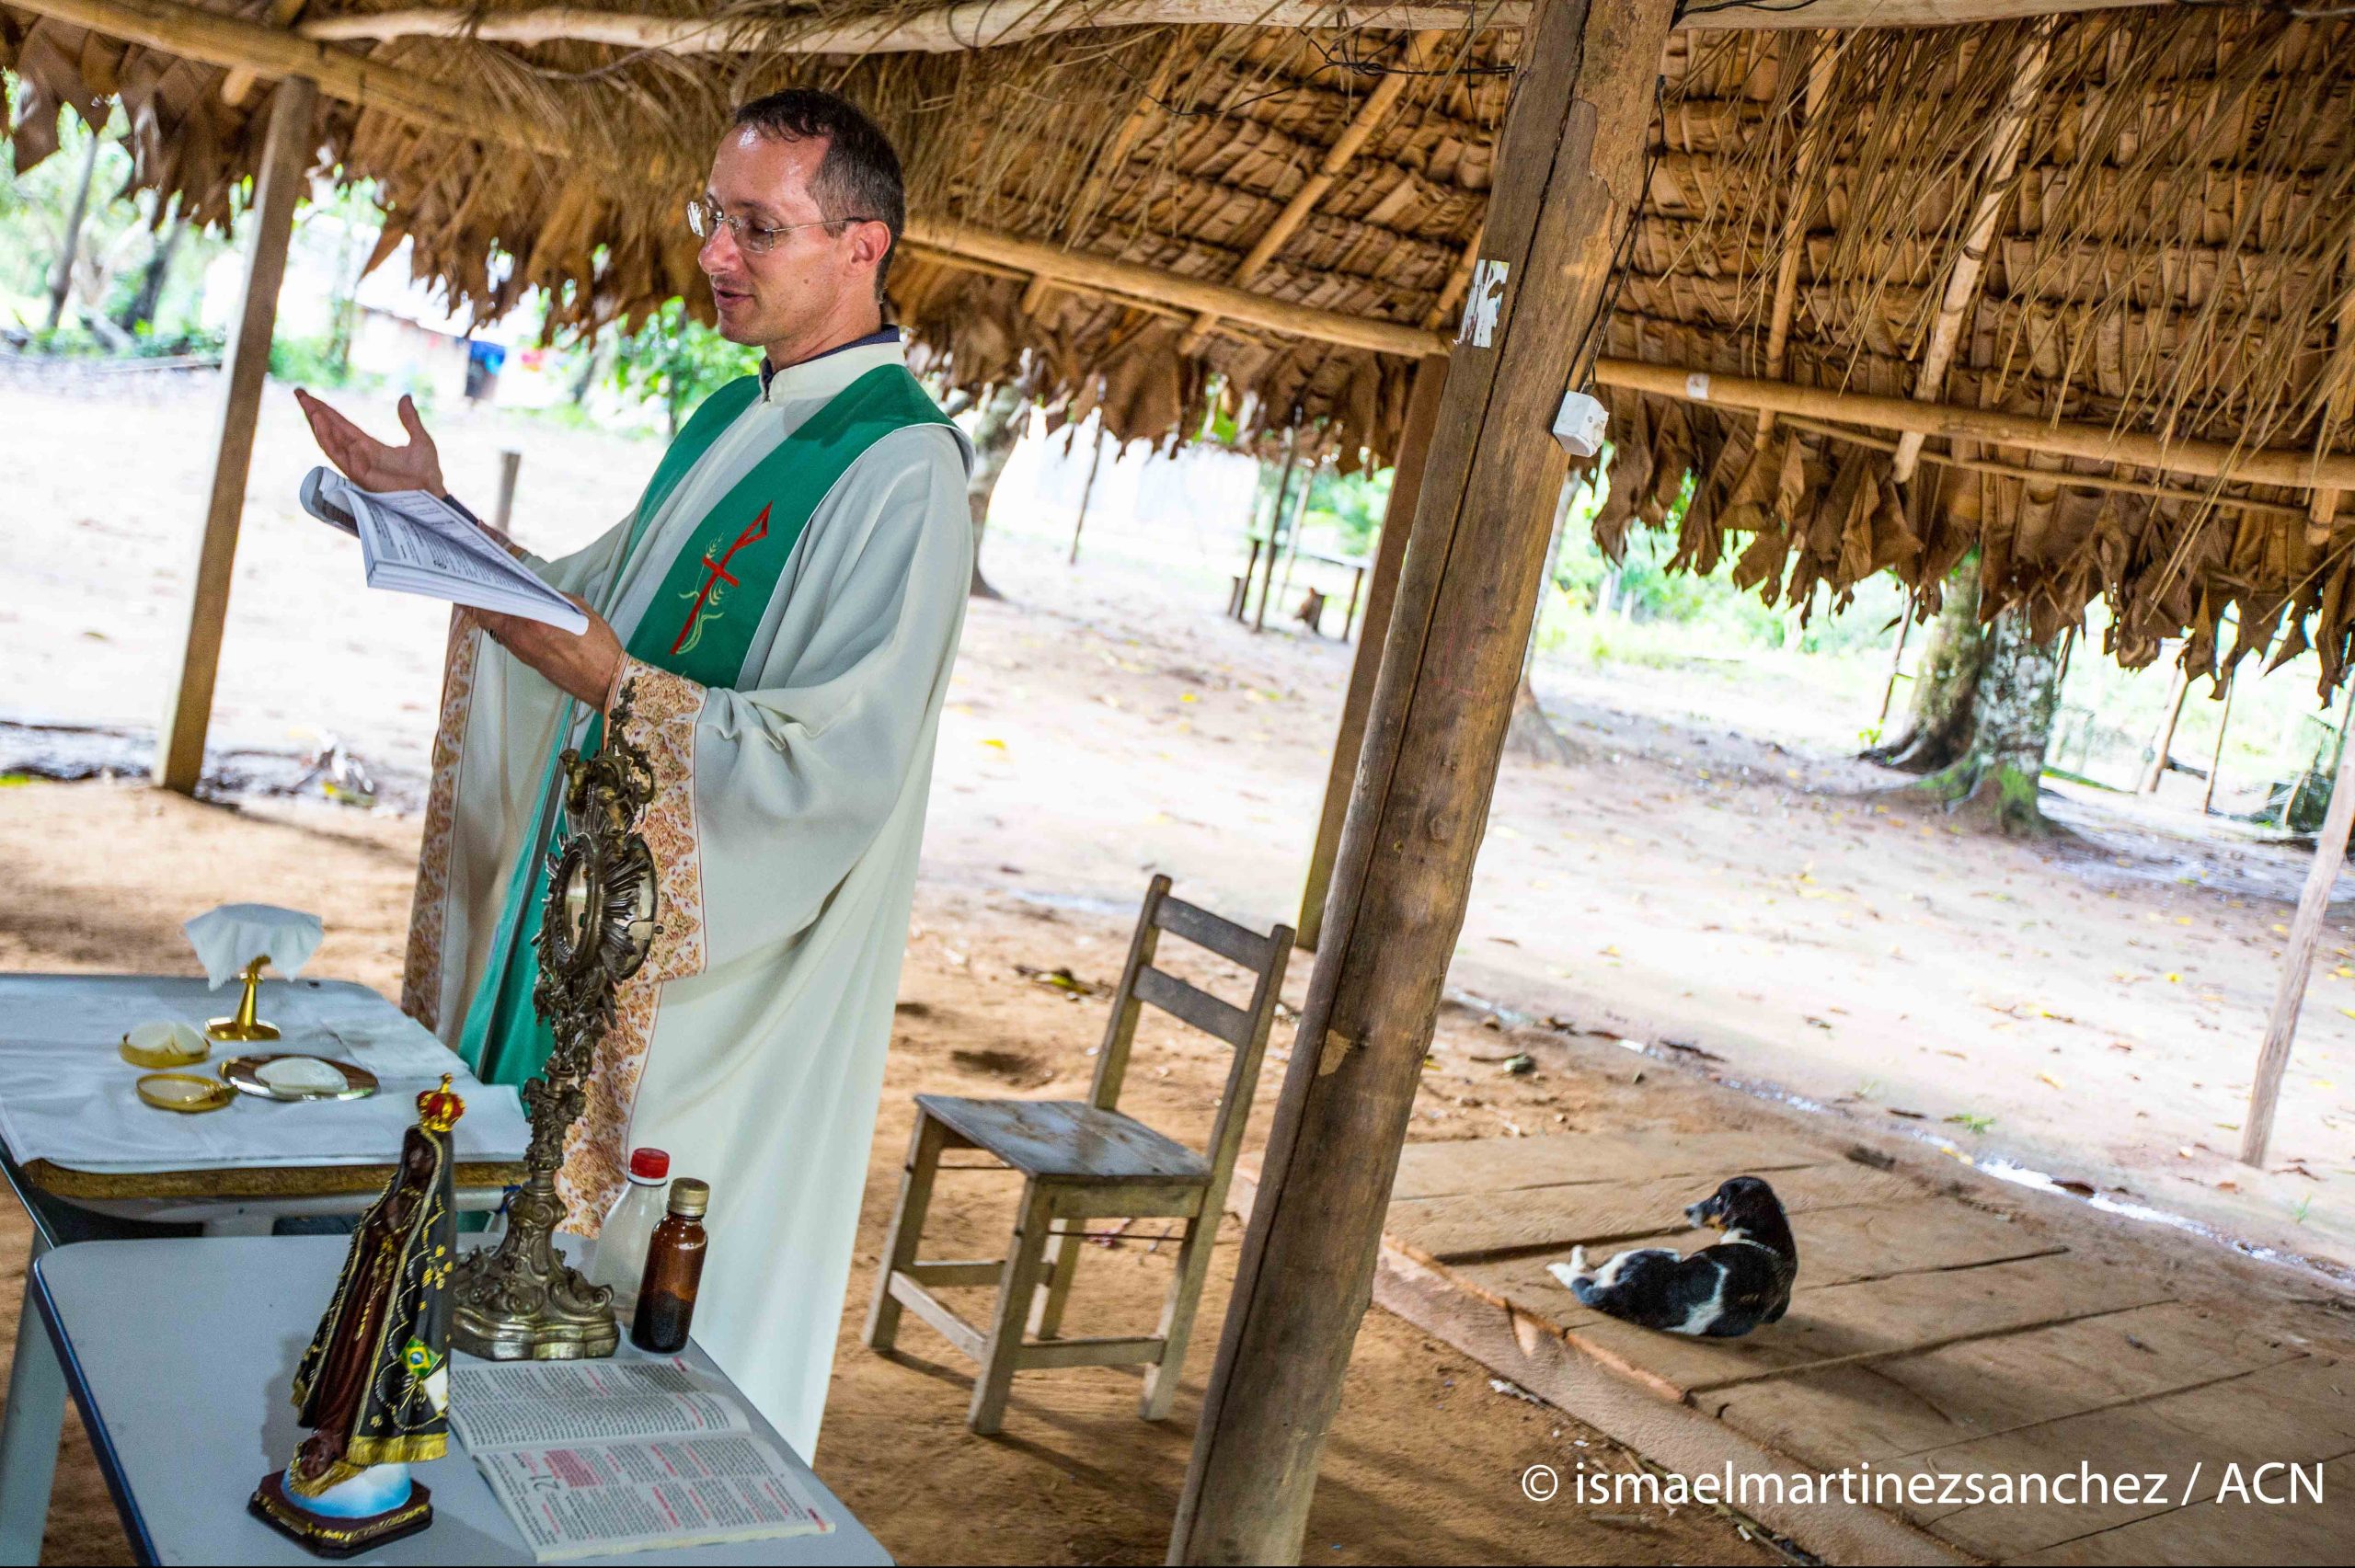 Father Adilson Selch, 41, during Mass in the indigenous village of Pé-de- Mutum. He is the parish priest of Castanheira, 50 km from Pé-de-Mutum by road and the last 6 km in canoe. From its parish in Castanheira, he serves the 34 Catholic indigenous communities of Juina, such as the Rikbaktsa tribe, although the most distant Indians he attends are 280 km and six hours by motorized canoe.